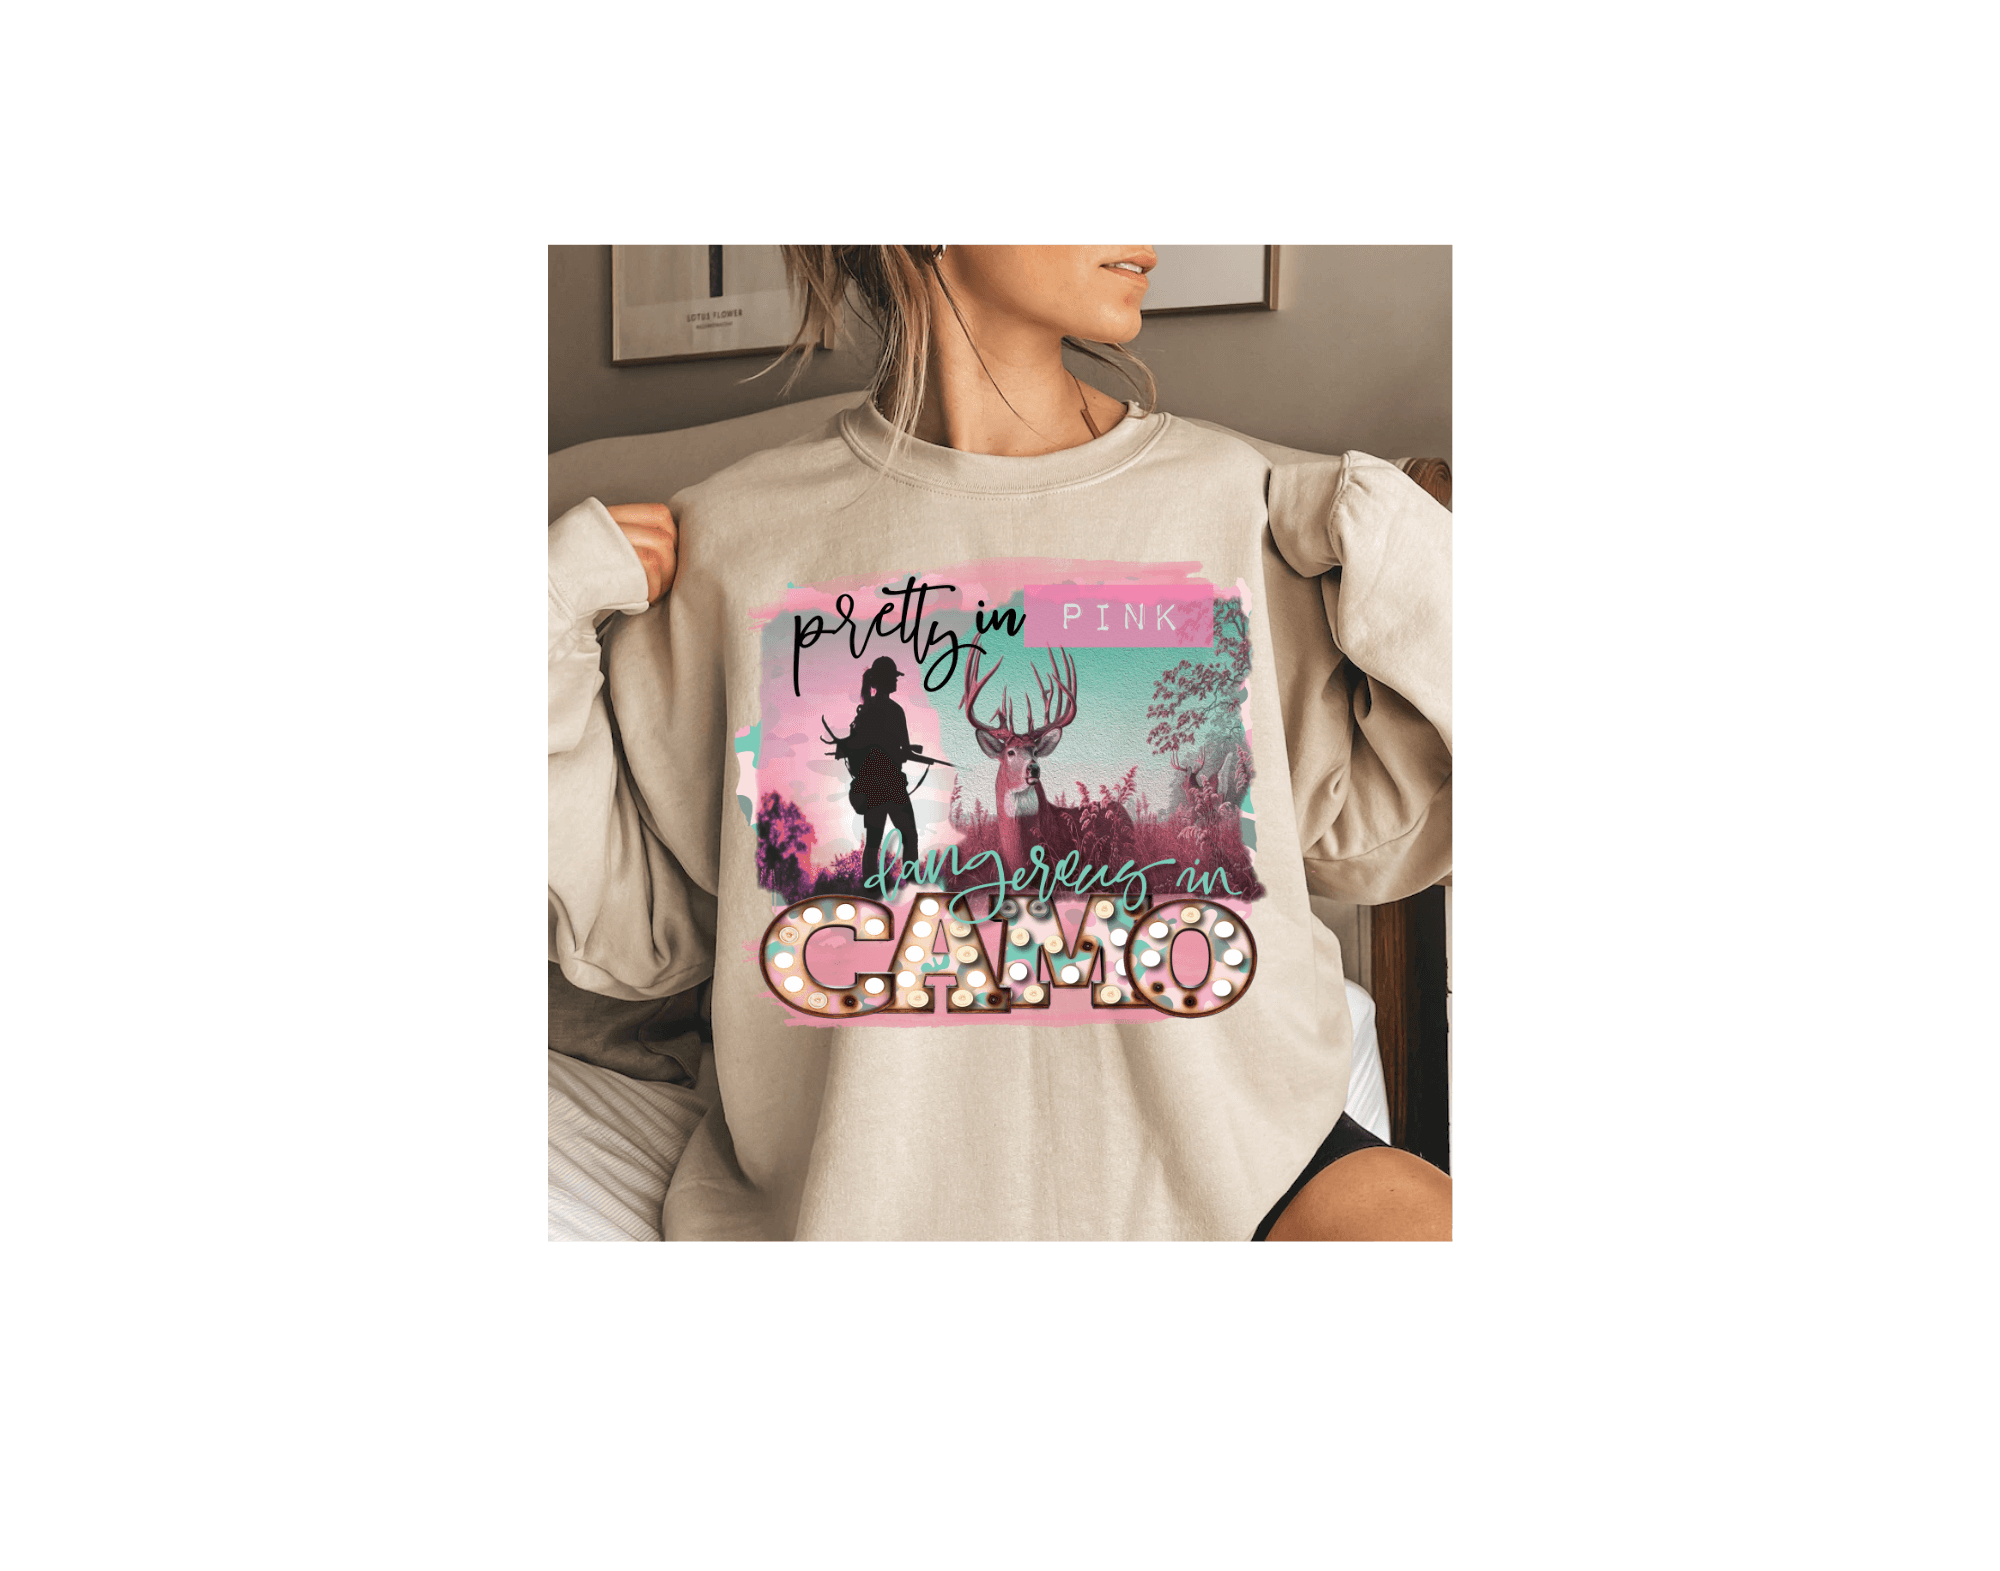 Crew Neck Sweatshirts for Women Who Love to Hunt - undefined - Hippies & Cowboys